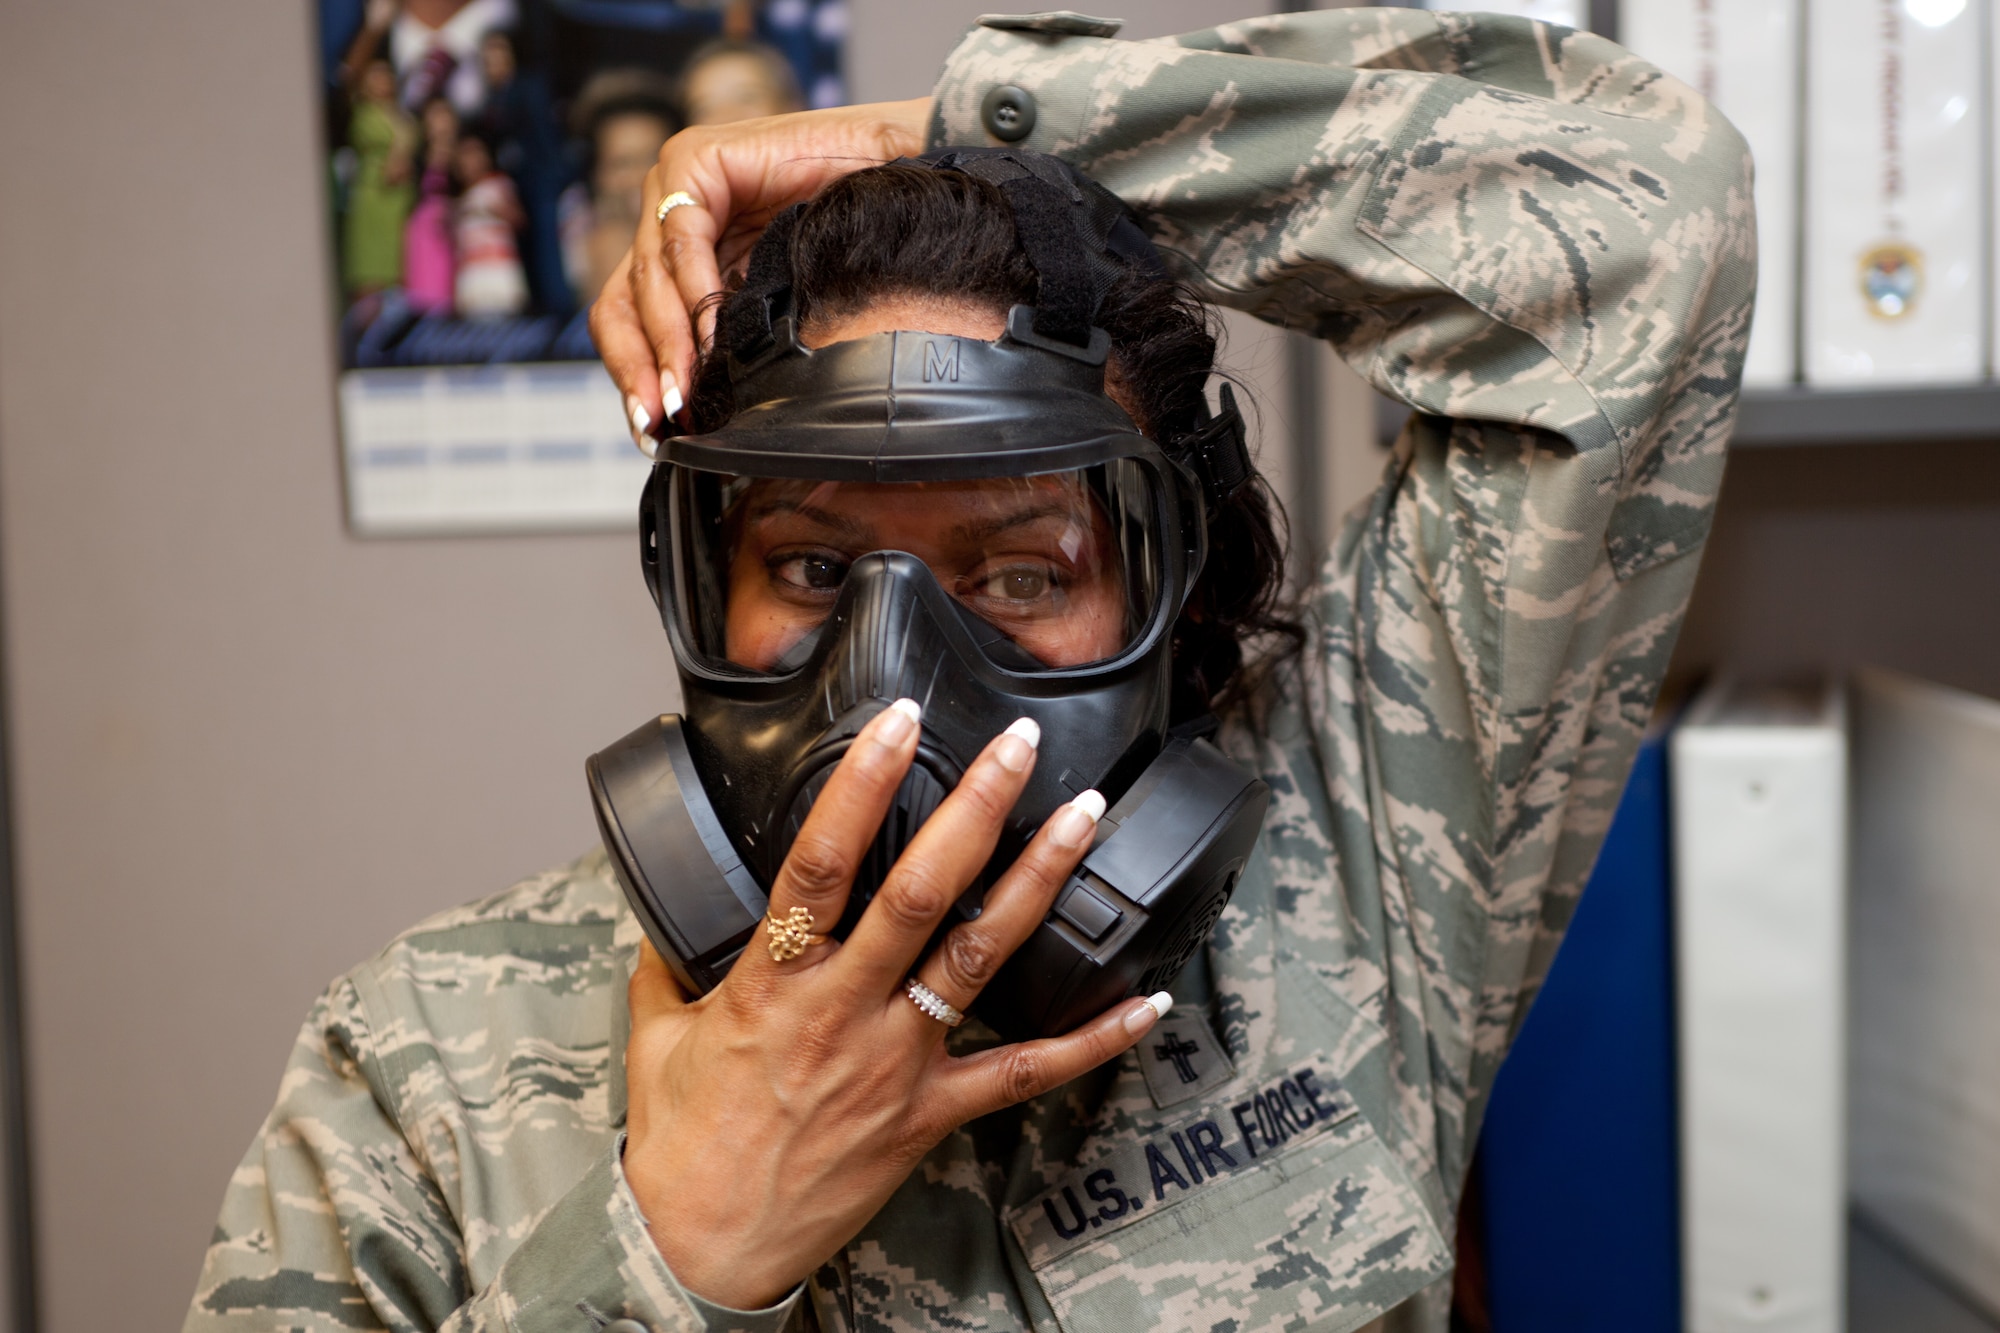 Chaplin (Major) Myrtle Bowen insures there is a good seal of her mask during a gas mask fit test. The D.C.  Air National Guard is replacing all MCU-2 A/P gas masks with the new M50 gas mask. The new M50 gas mask has twin conformal filters, which allow 50 percent improvement in breathing resistance, and allows for over 24 hours of protection against chemical or biological agents and radioactive particulate matter. (U.S. Air Force Photo by Tech Sgt. Gareth Buckland)